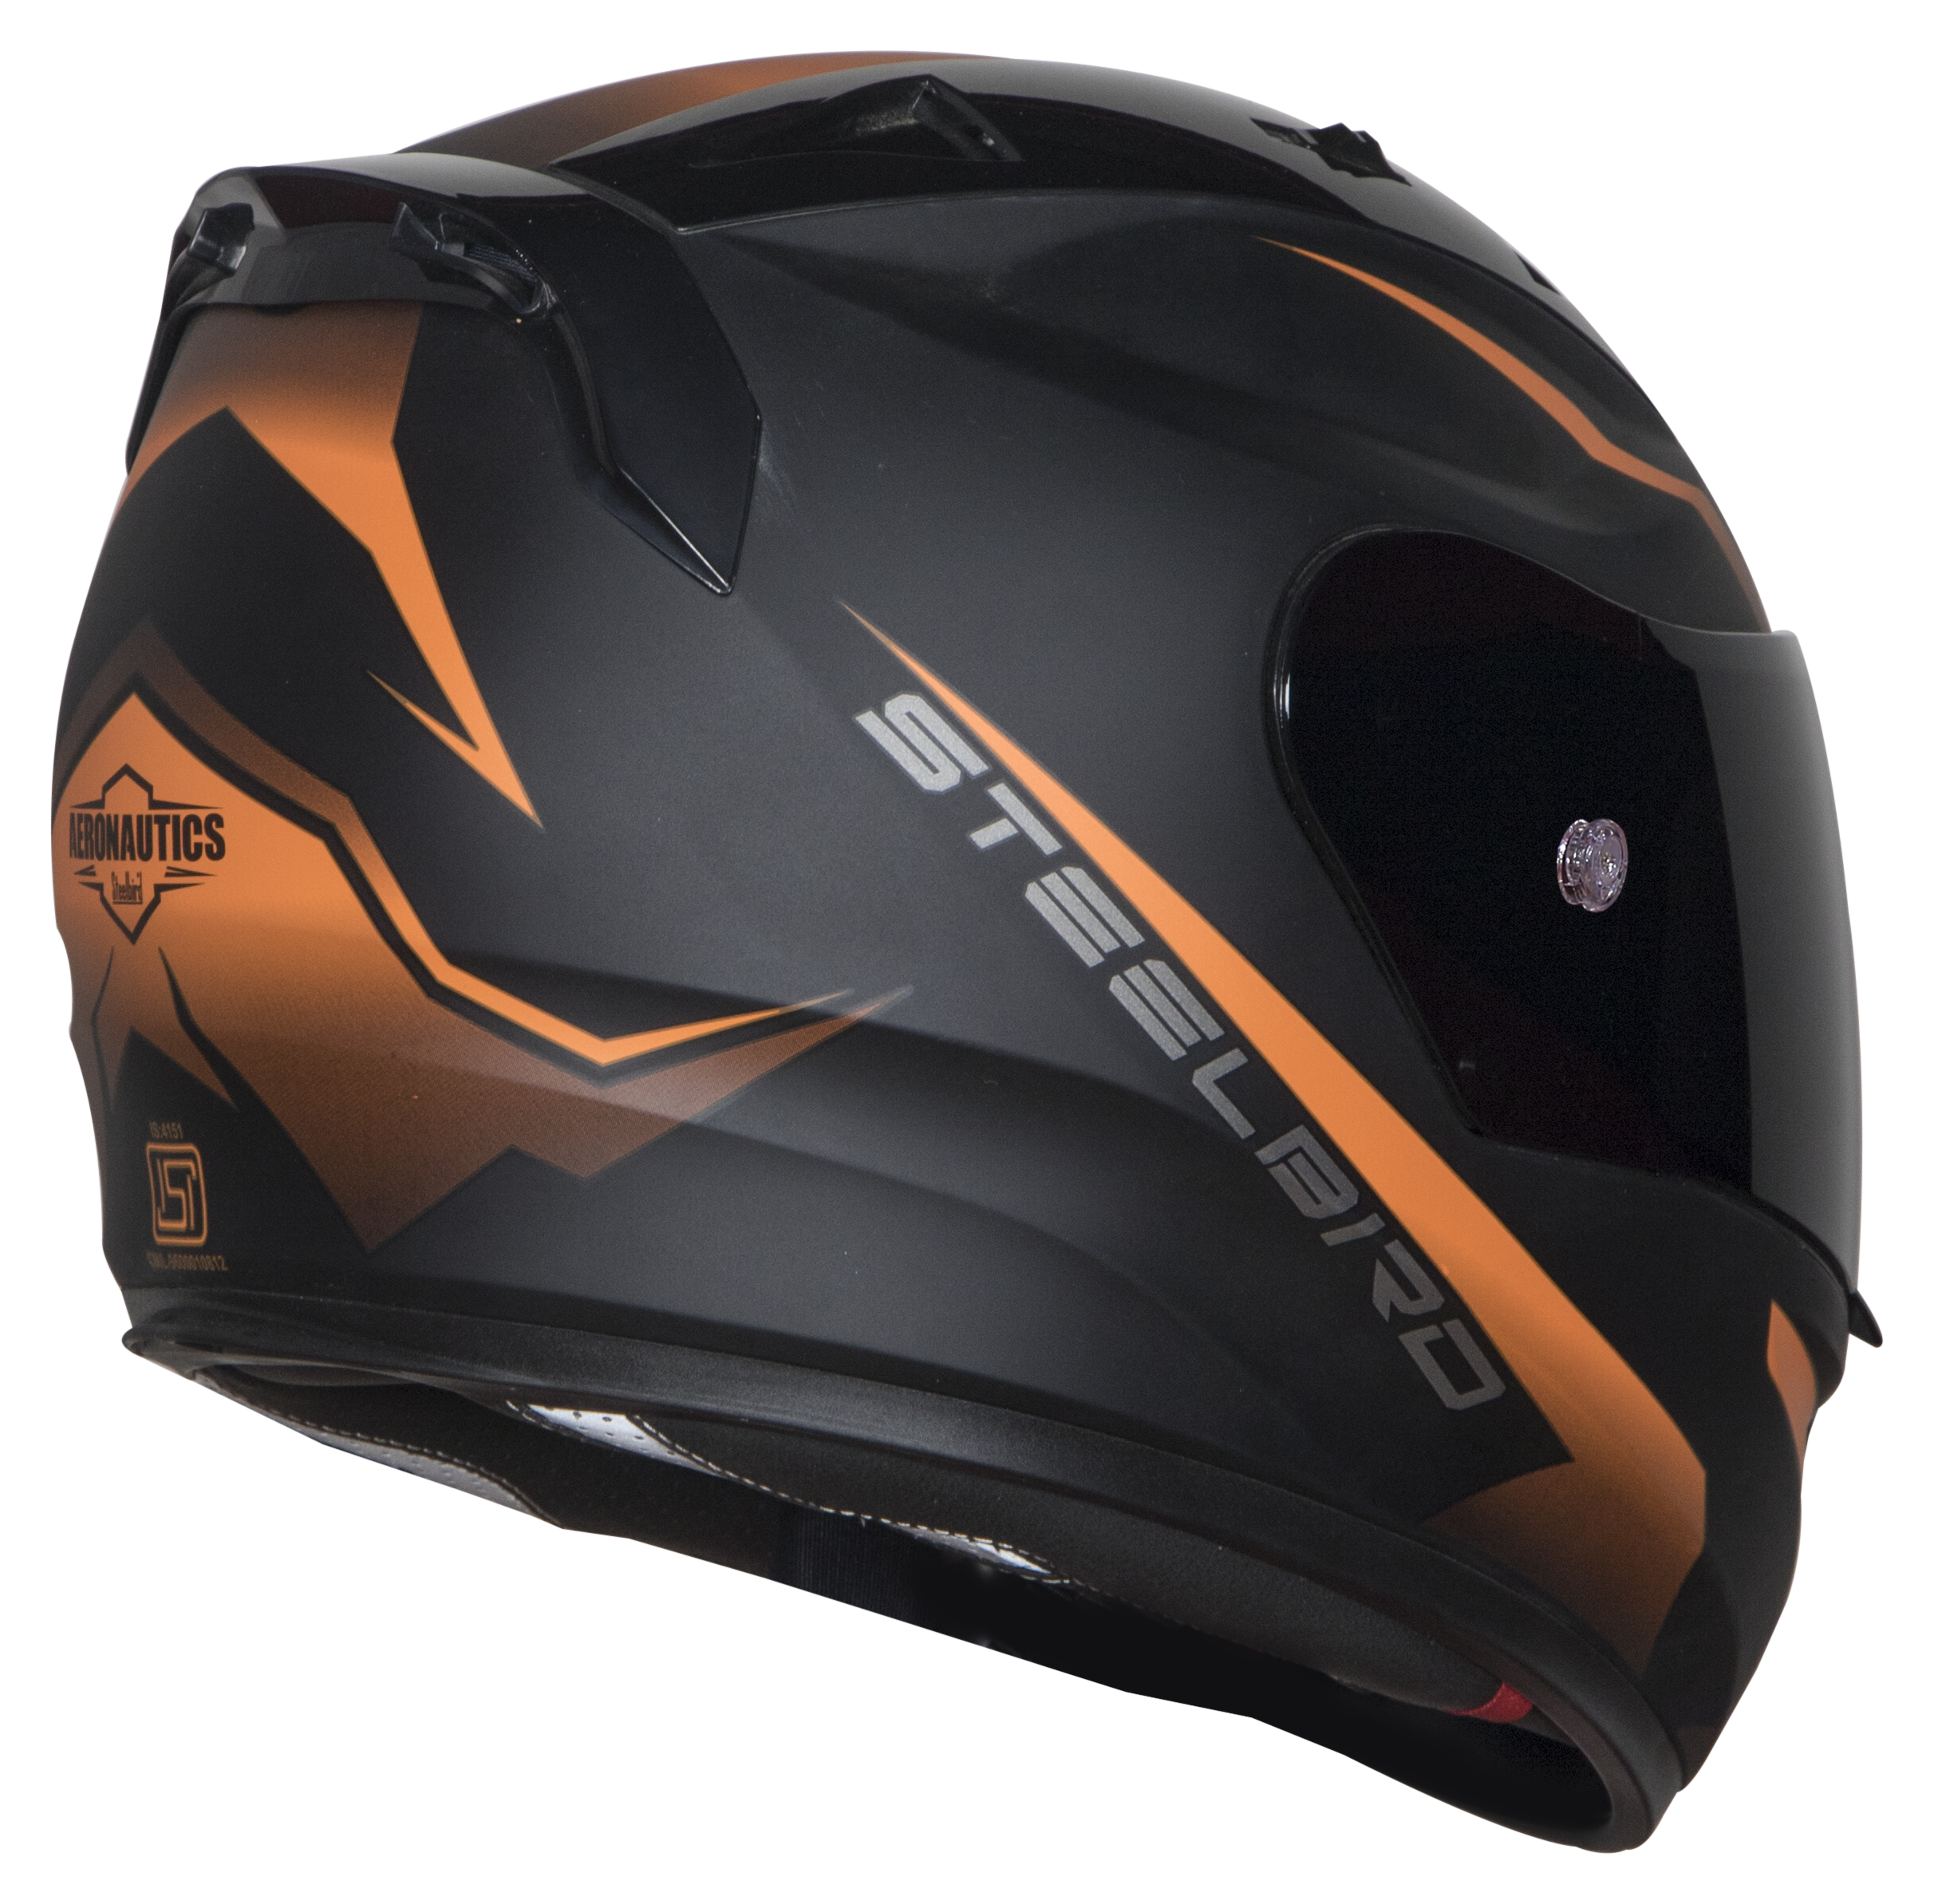 SA-1 WHIF Mat Black/Orange With (Fitted With Clear Visor Extra Anti-Fog Shield Chrome Rainbow Visor Free)